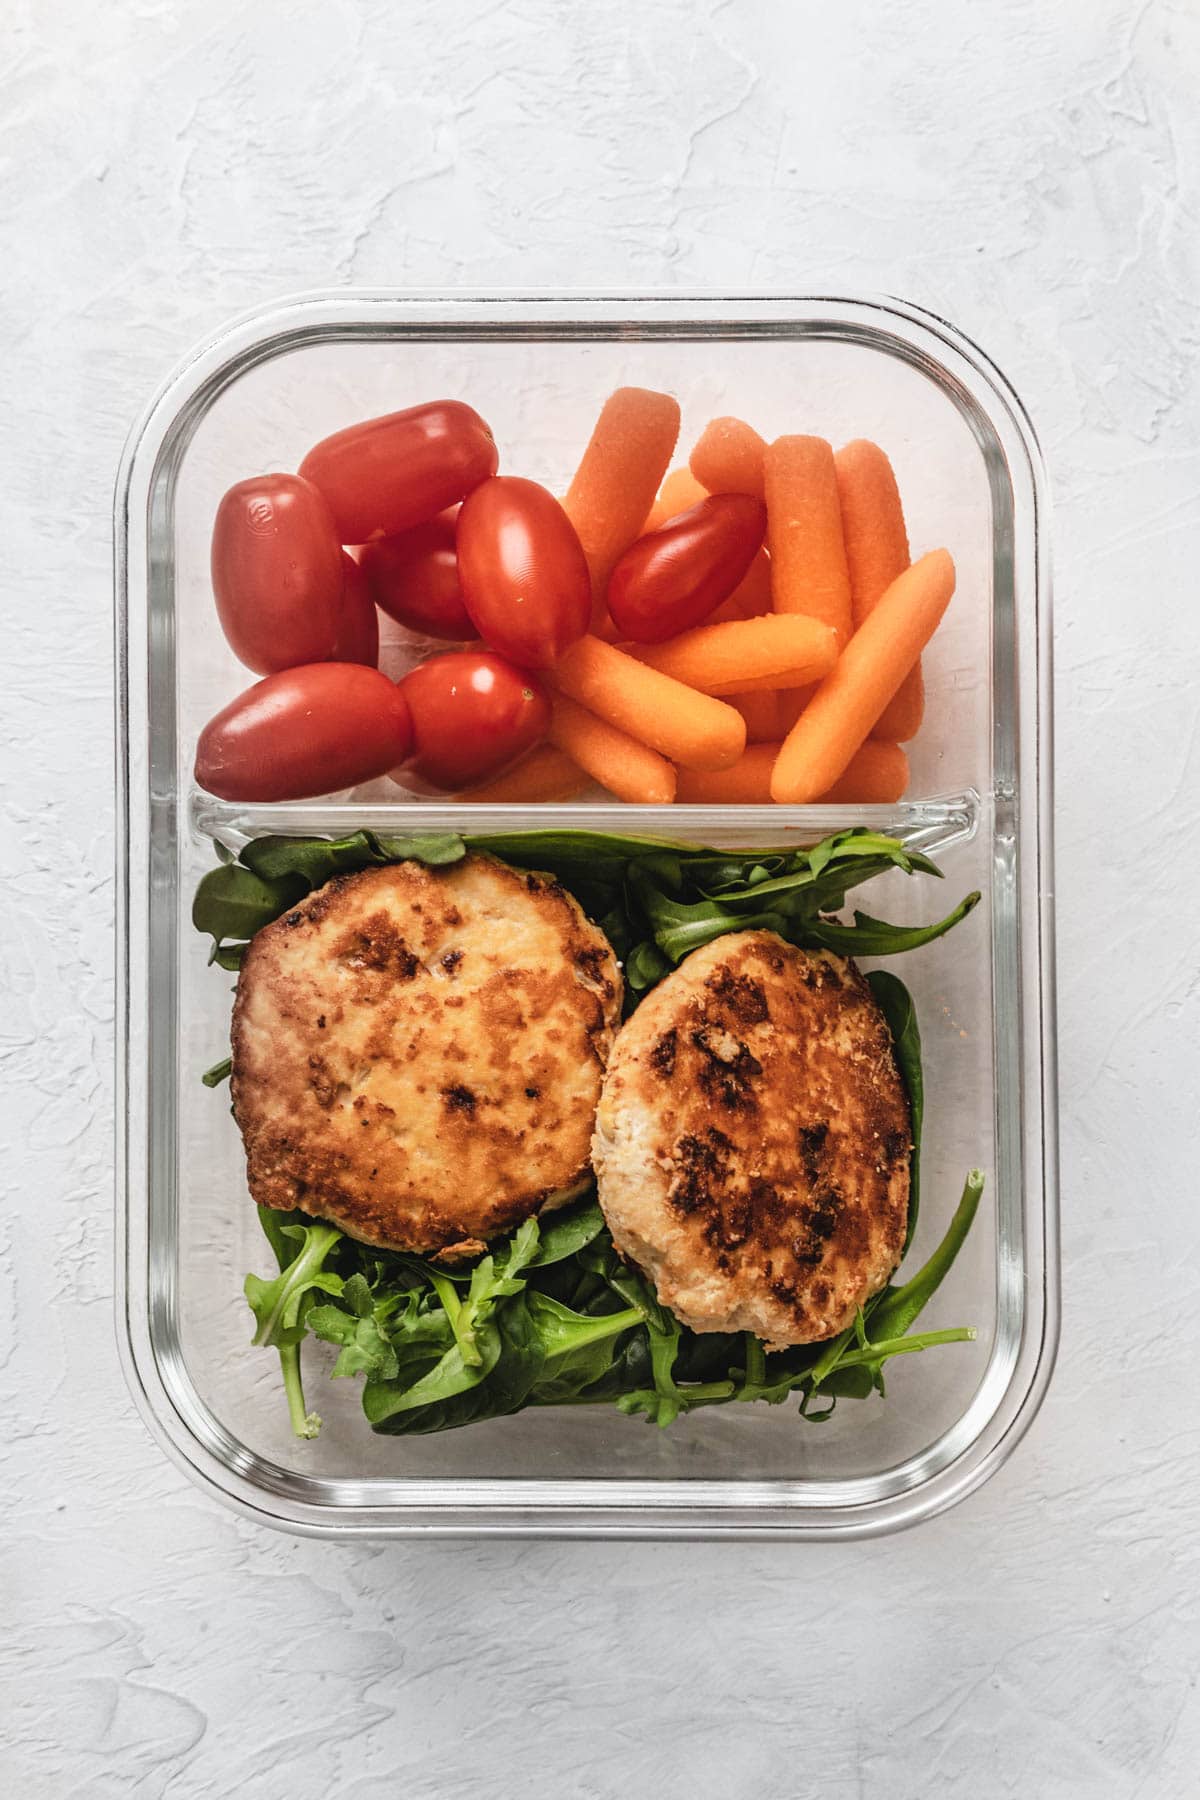 a meal prep container with tomatoes, carrots, chicken burgers, and lettuce